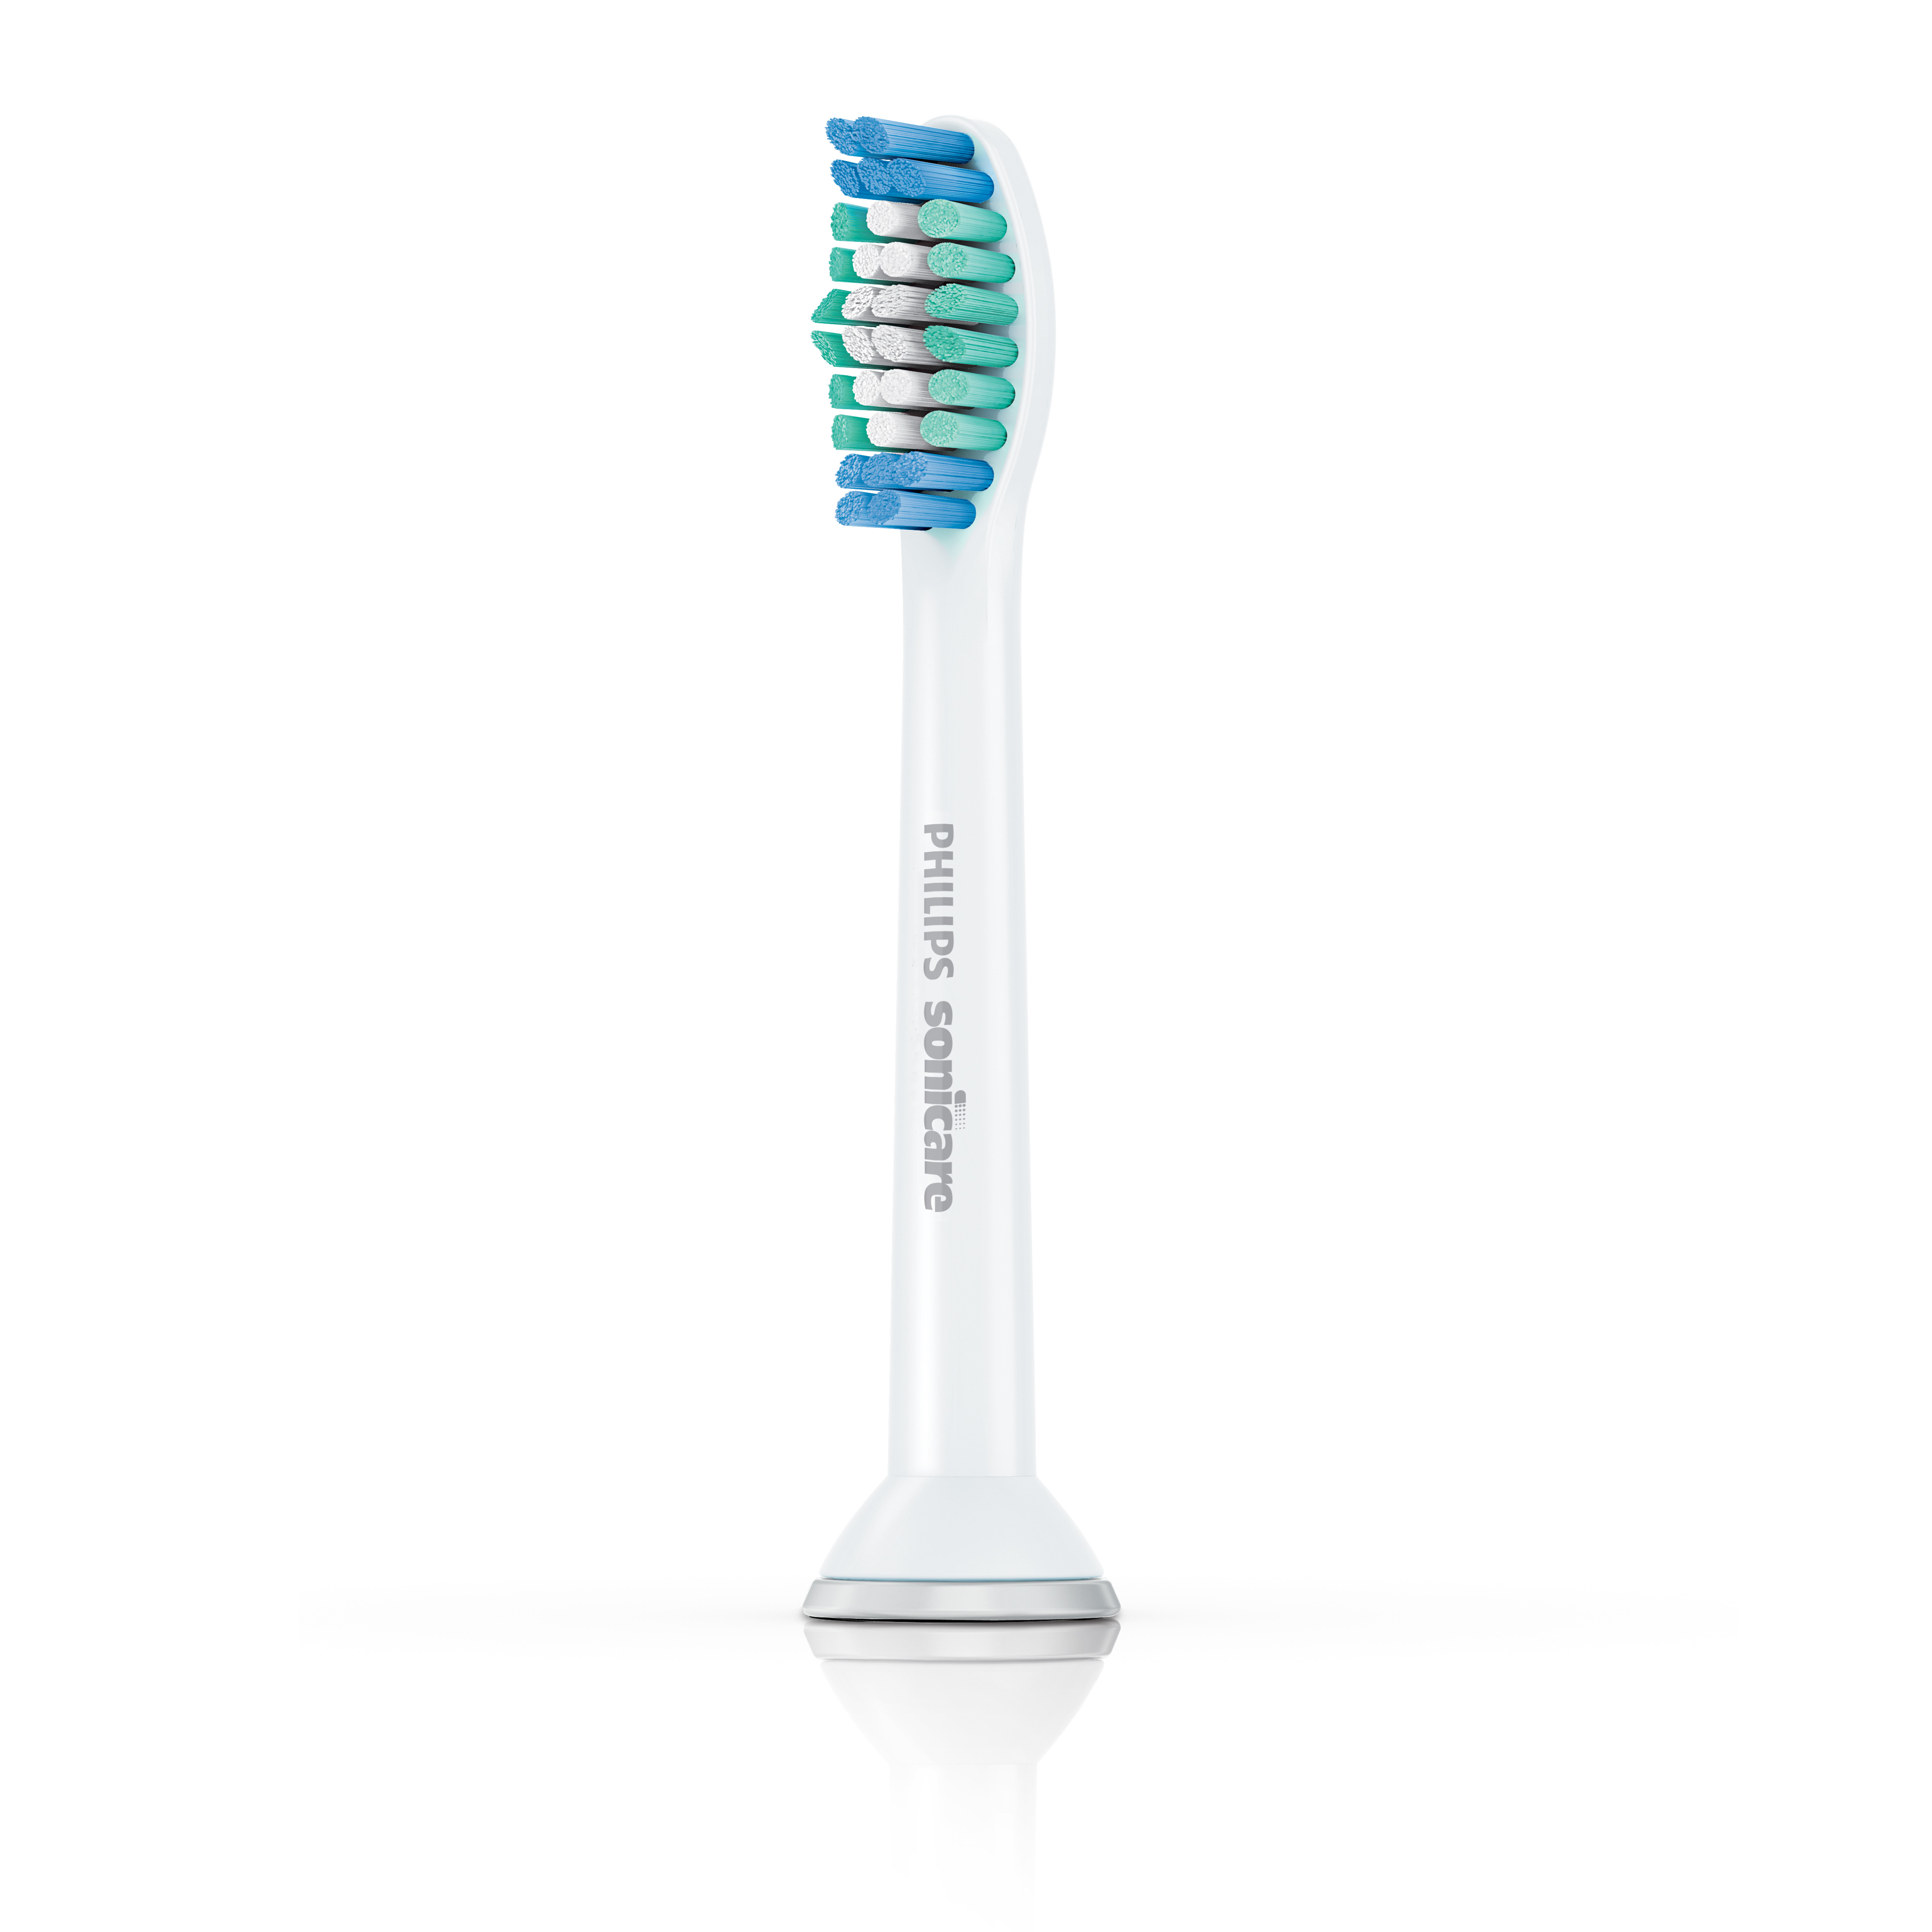 Philips Sonicare Dailyclean 1100 Rechargeable Electric Toothbrush, White HX3411/05 - image 5 of 10